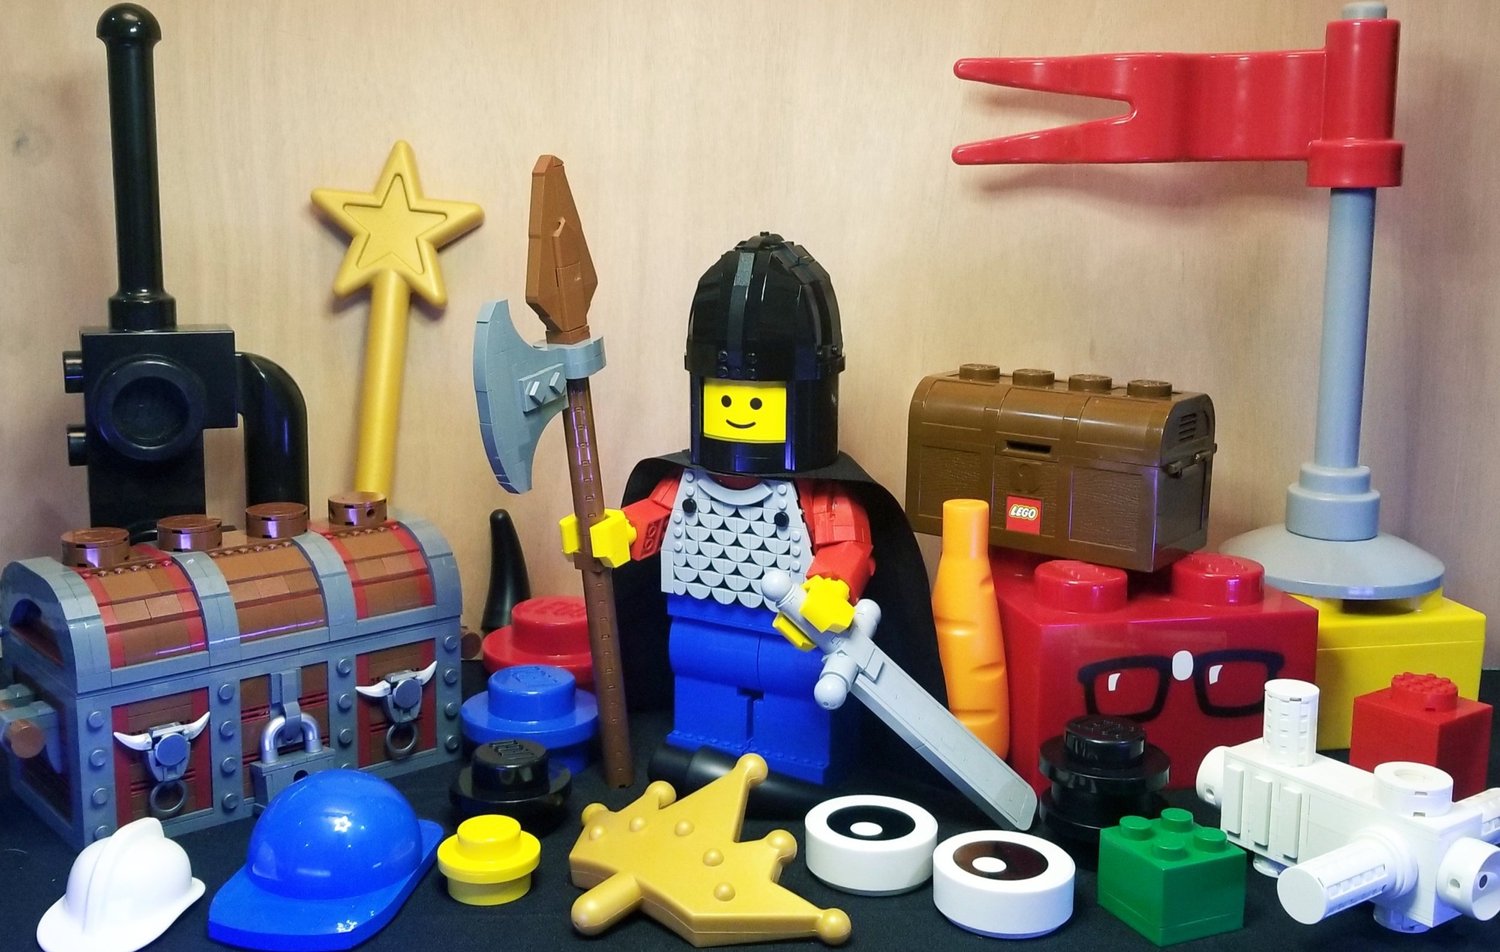 Playing With Scale: Upgrading the Up-Scaled LEGO Minifigure